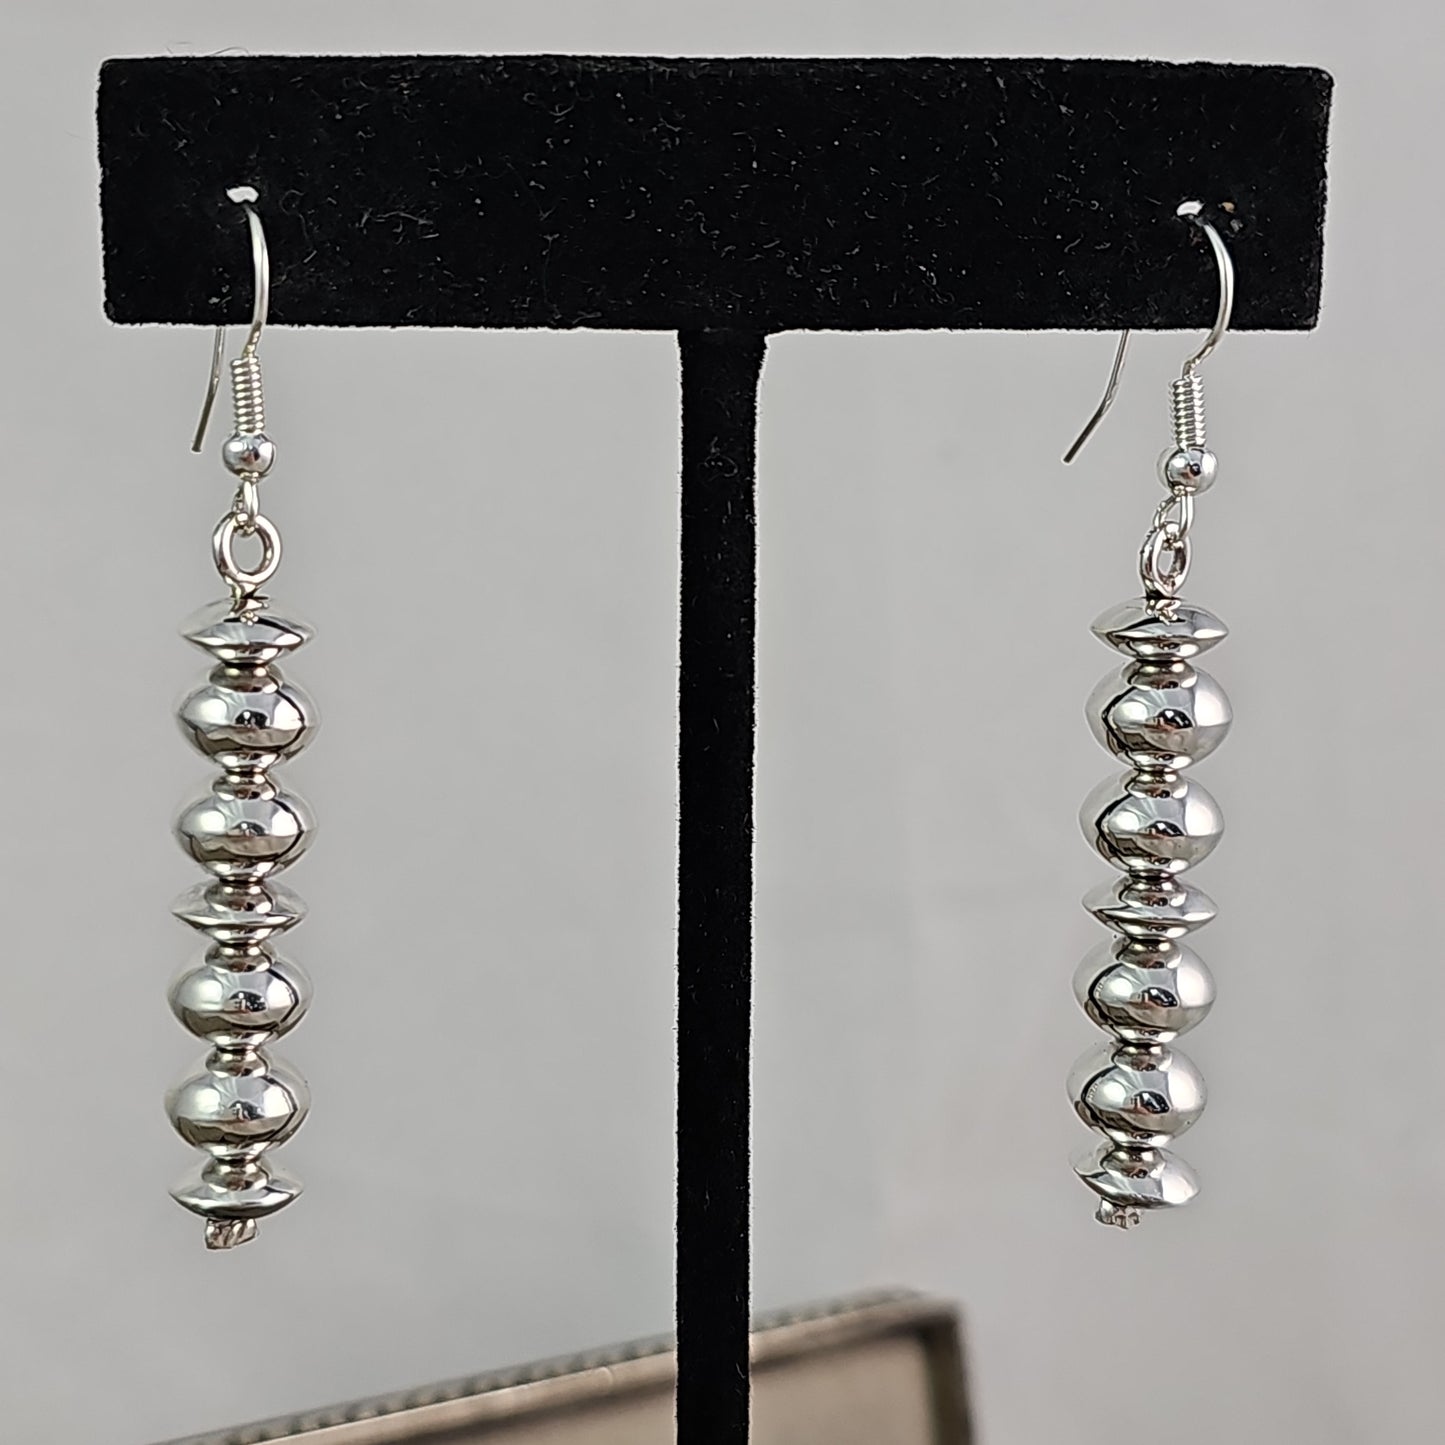 Navajo pearl earrings with saucer bead accents.